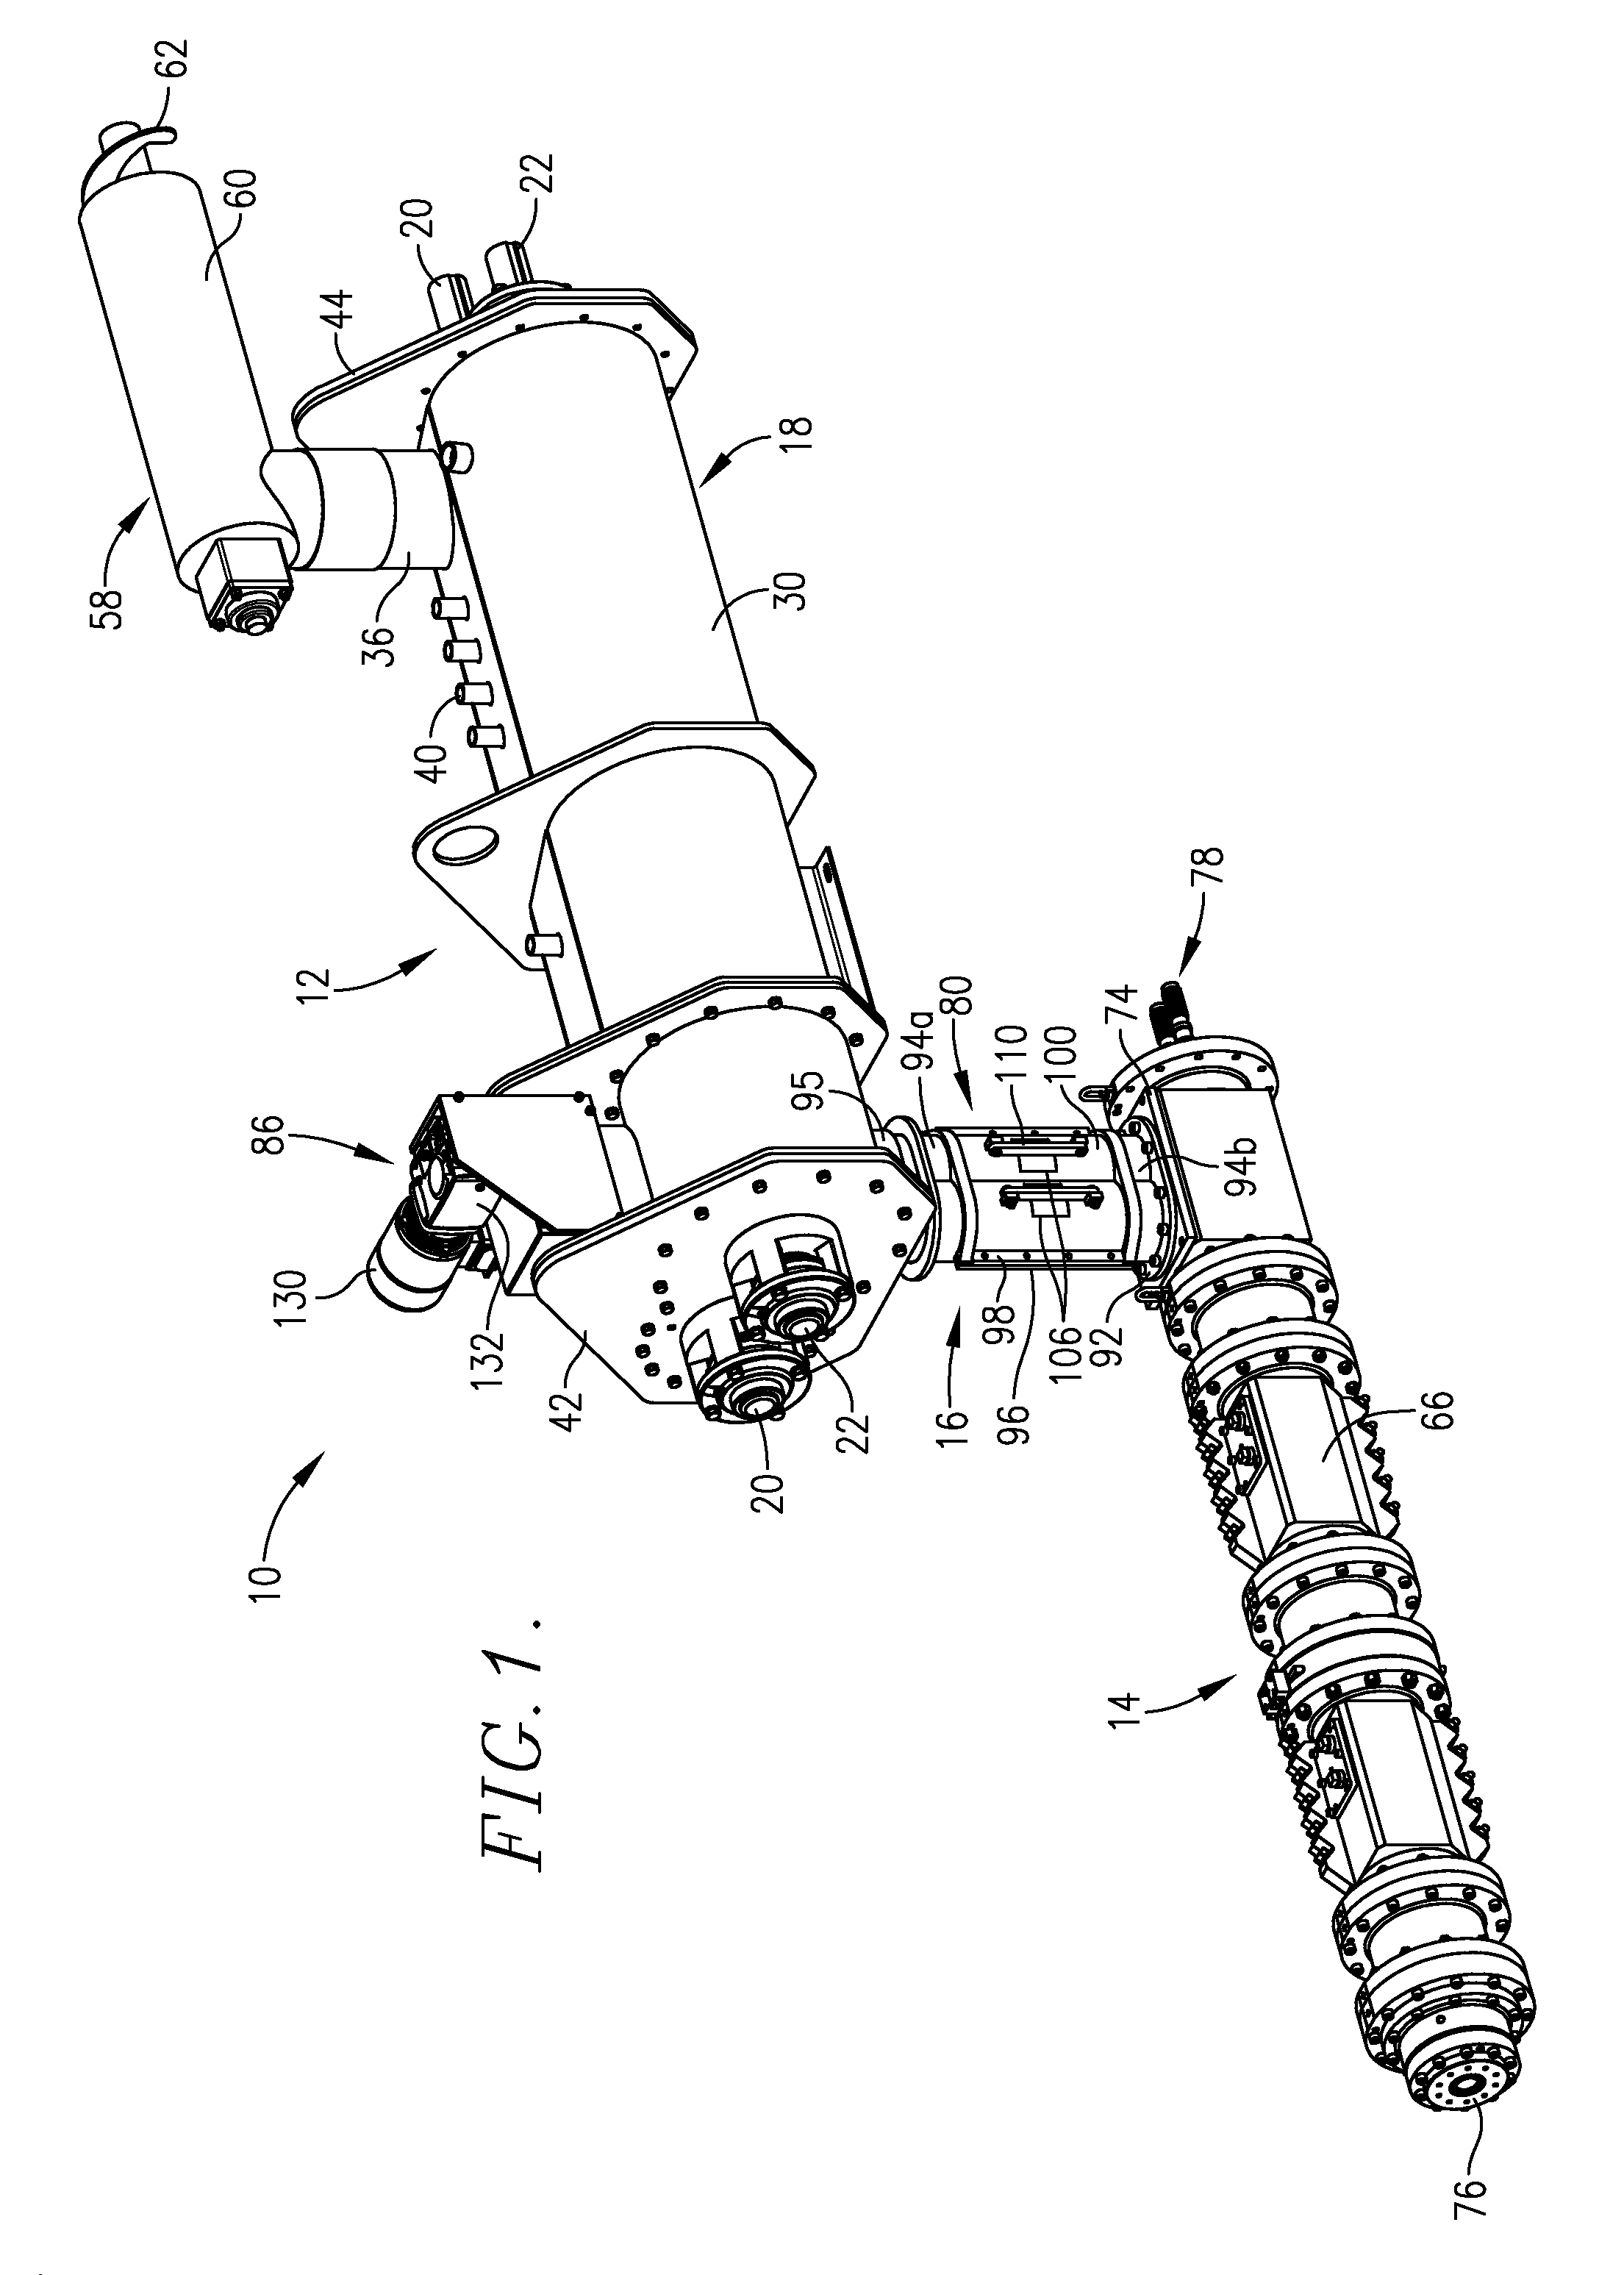 Apparatus for positive feeding from a preconditioner